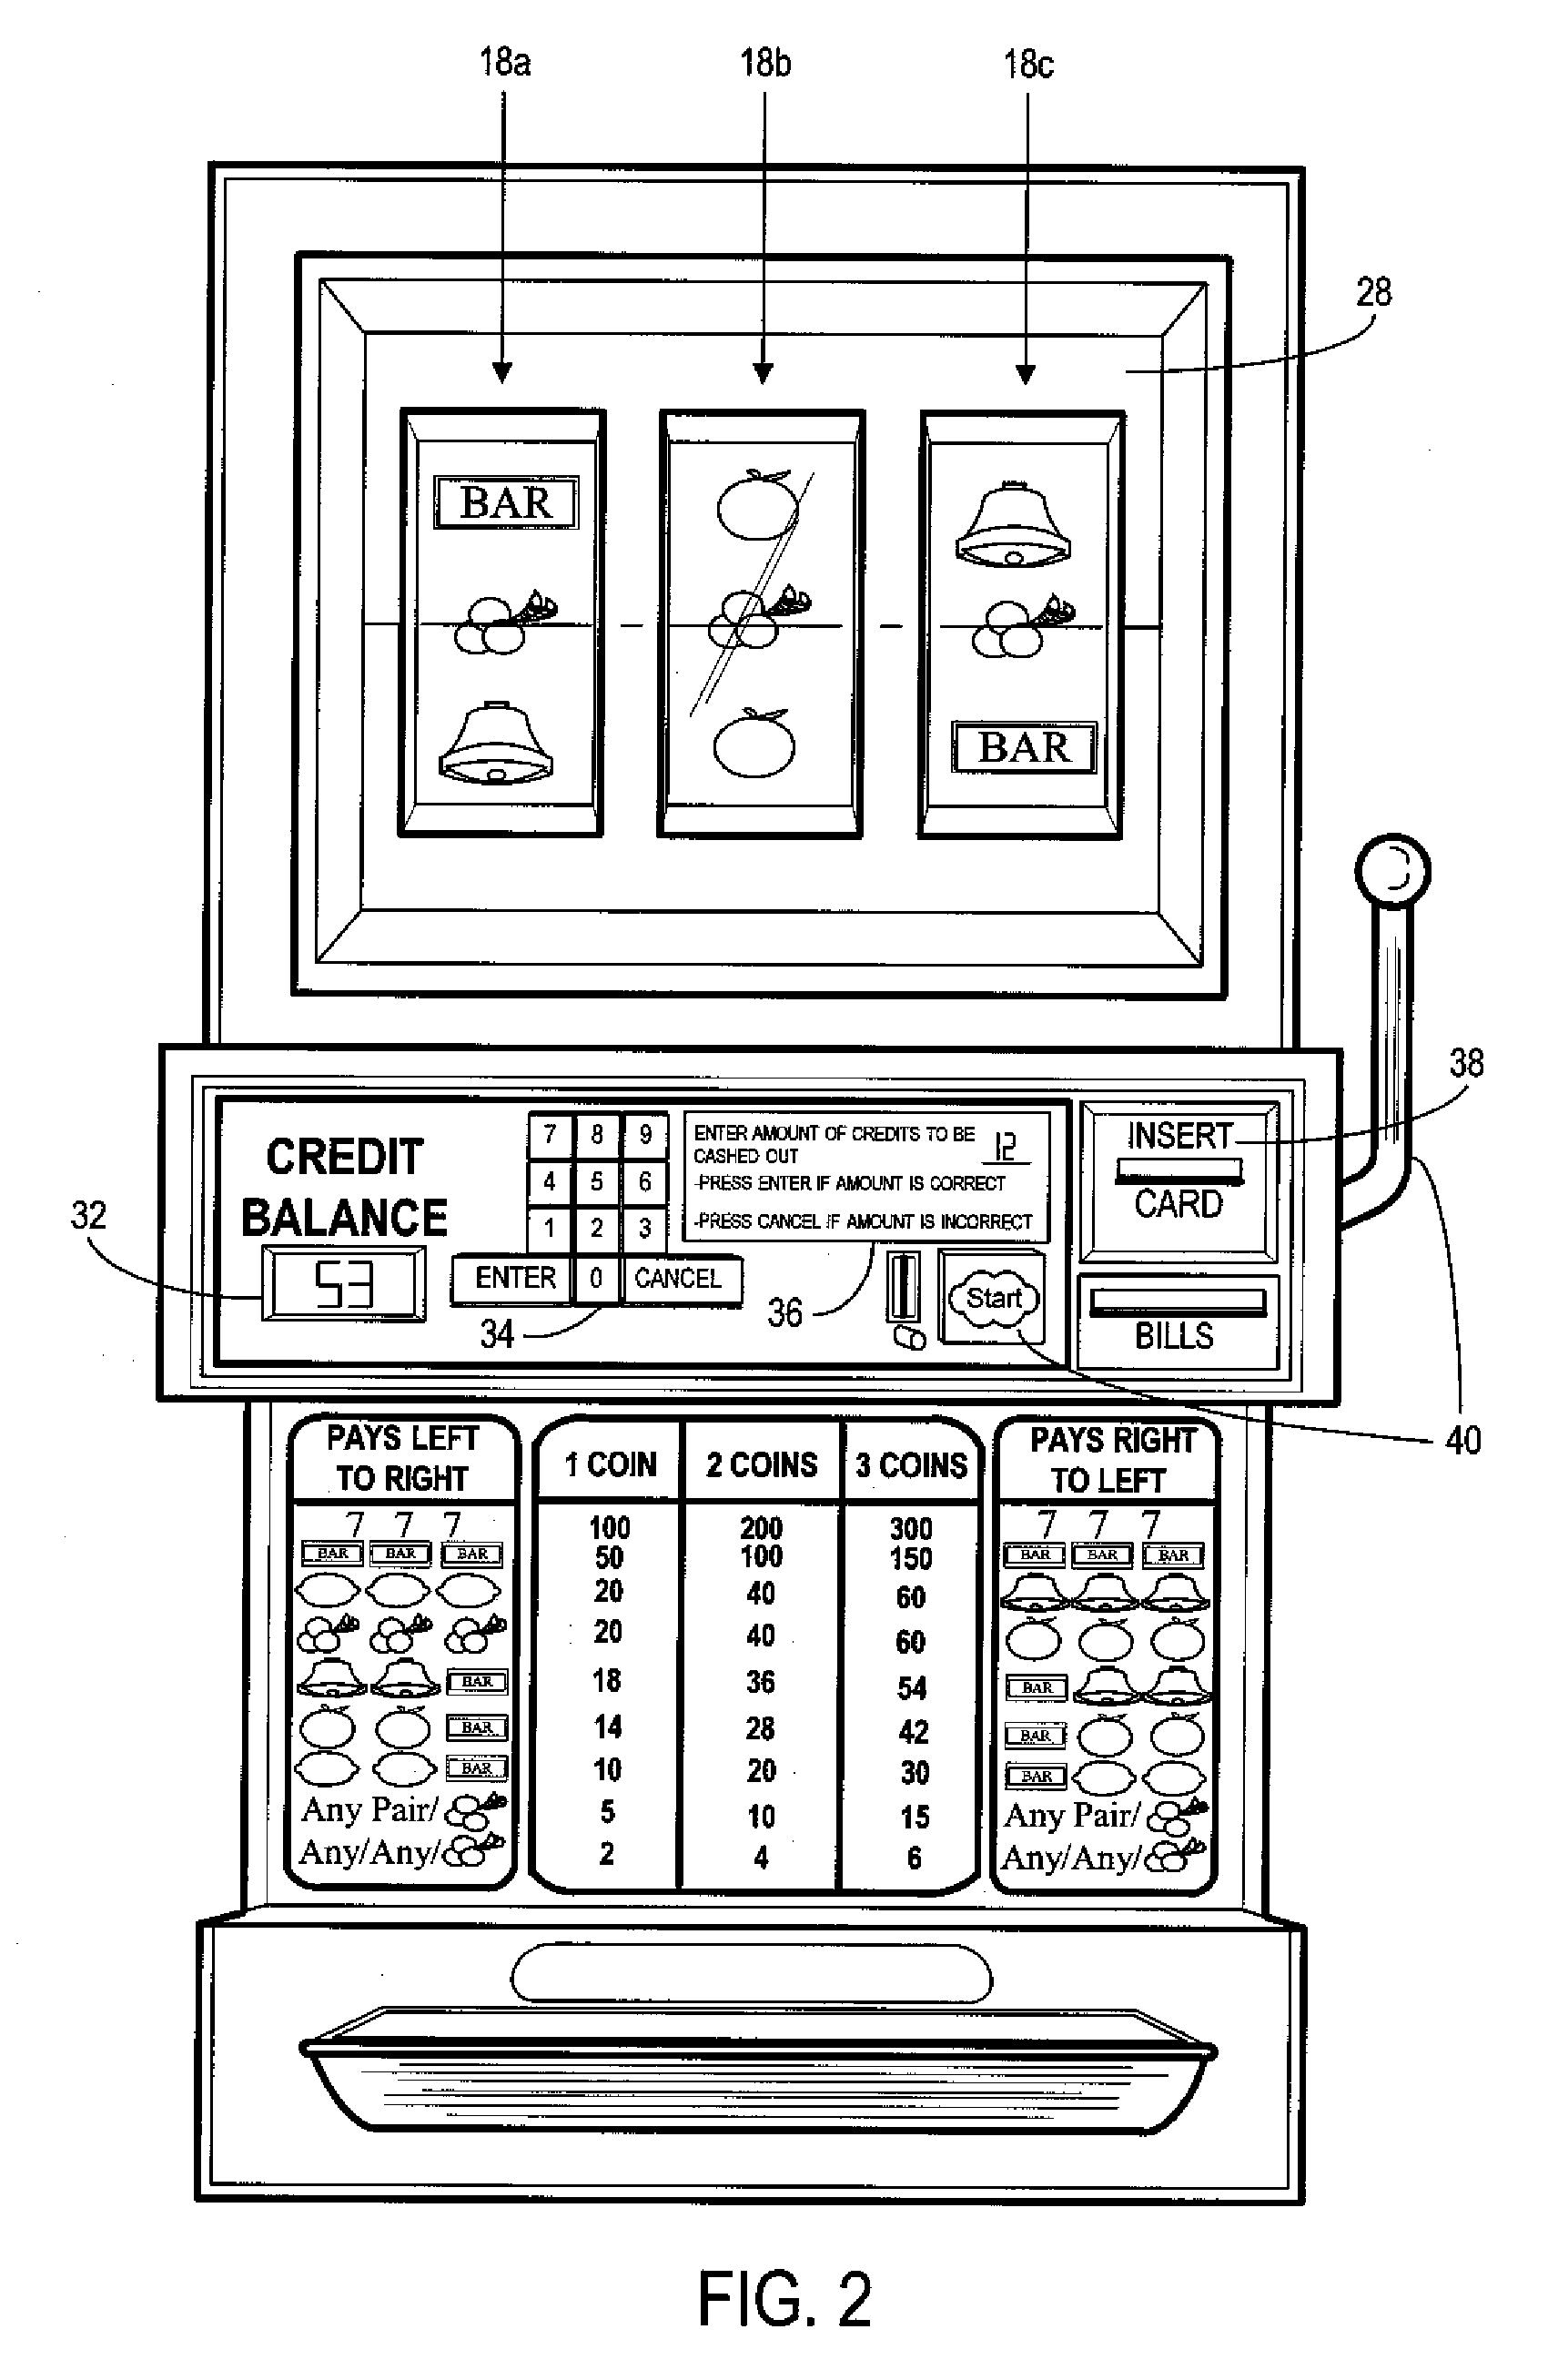 Method and apparatus for operating a gaming device to dispense a specified amount